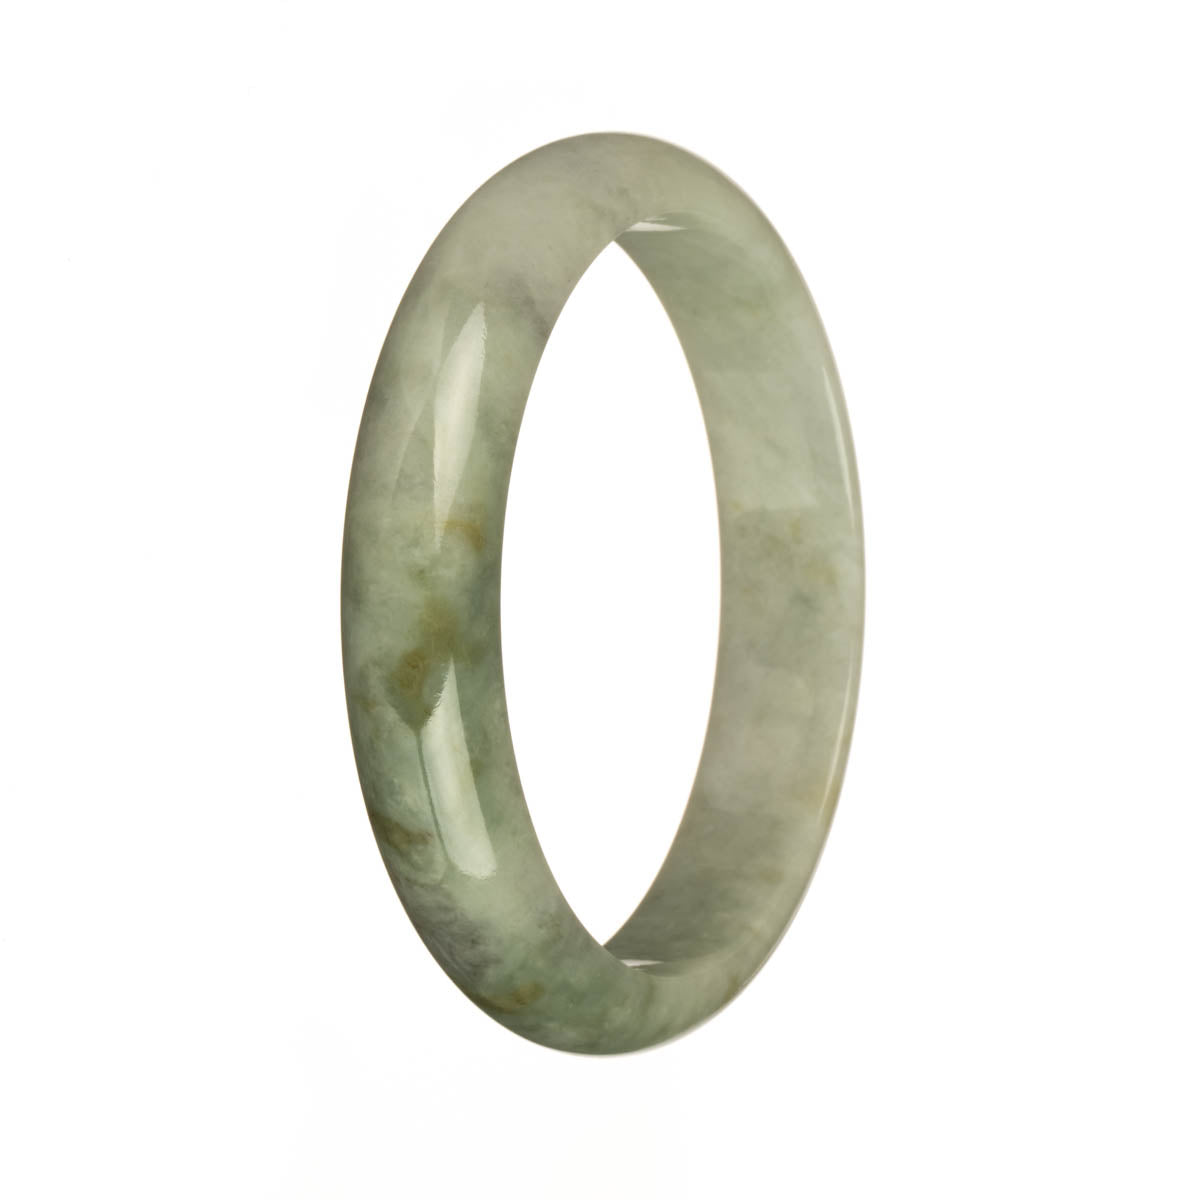 A stunning genuine Burma Jade bangle bracelet with a mix of white, light grey, brown, and green patterns, featuring a 59mm half moon shape. Exquisite craftsmanship by MAYS™.